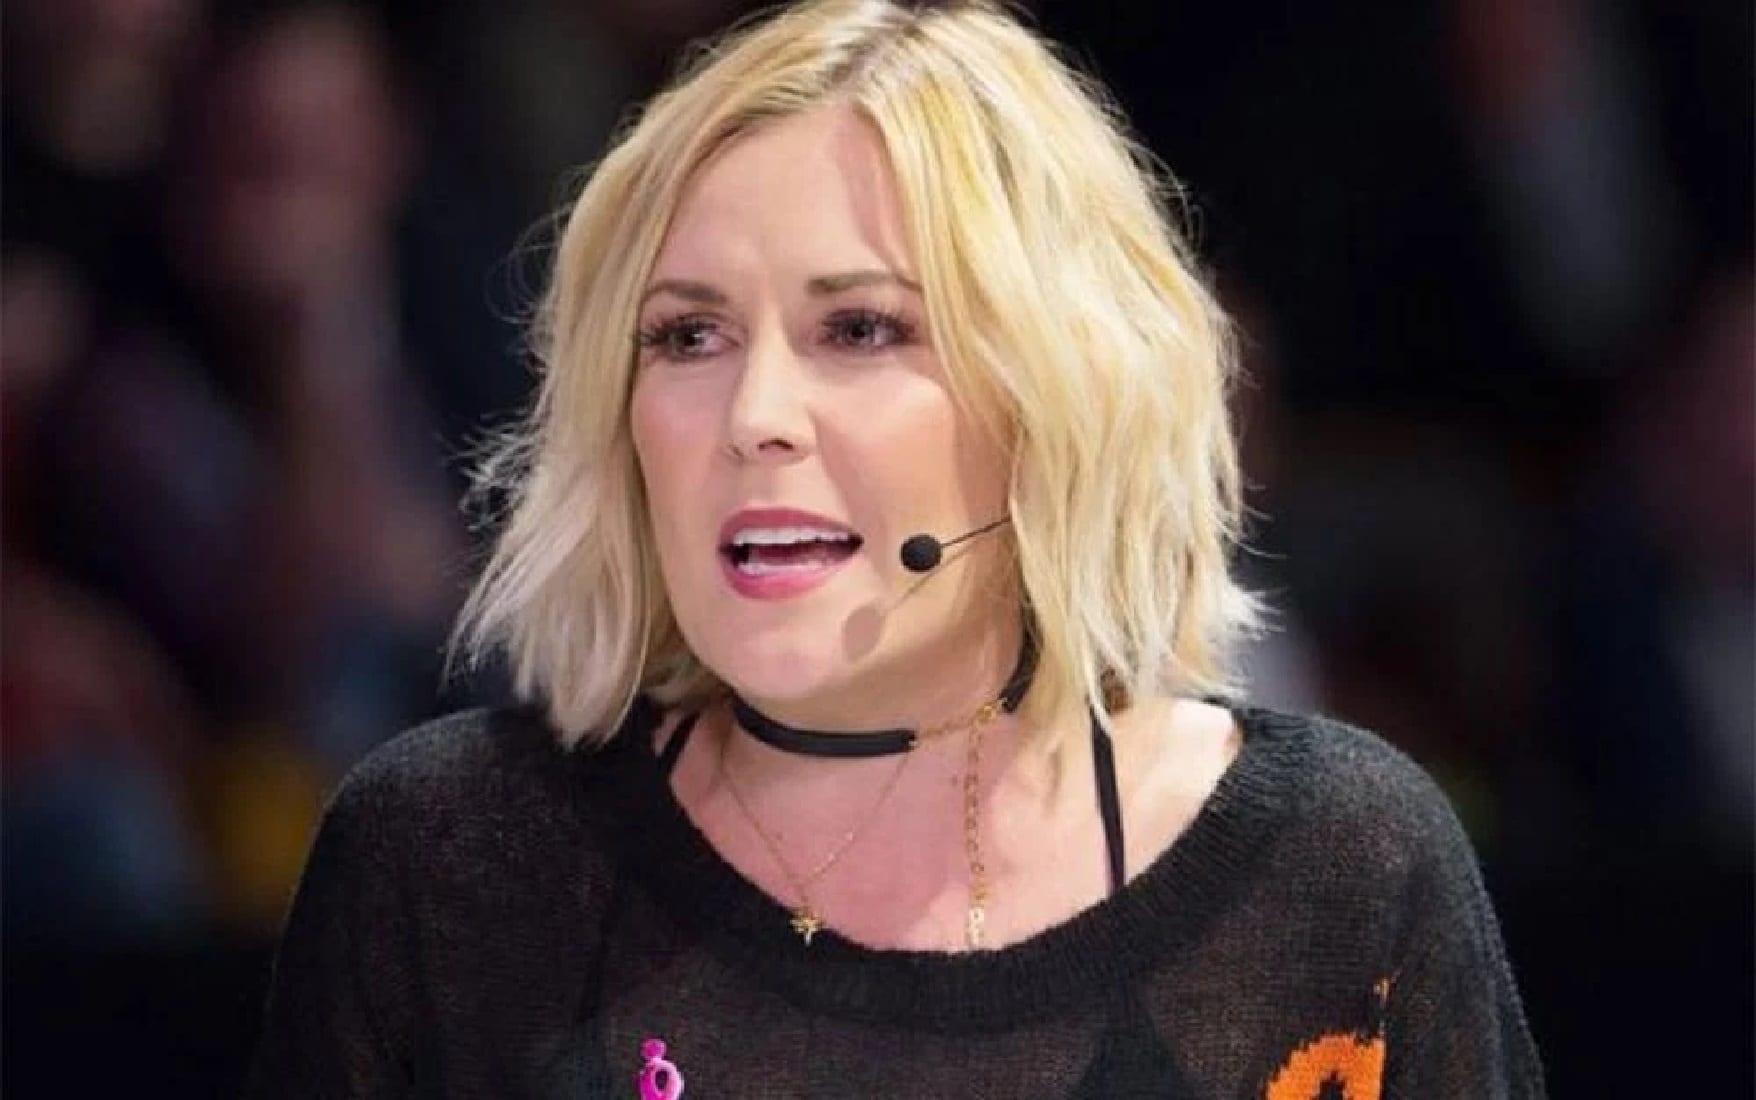 Renee Young On How CBD Oil Helps Her Overcome “Crippling Panic Attacks”